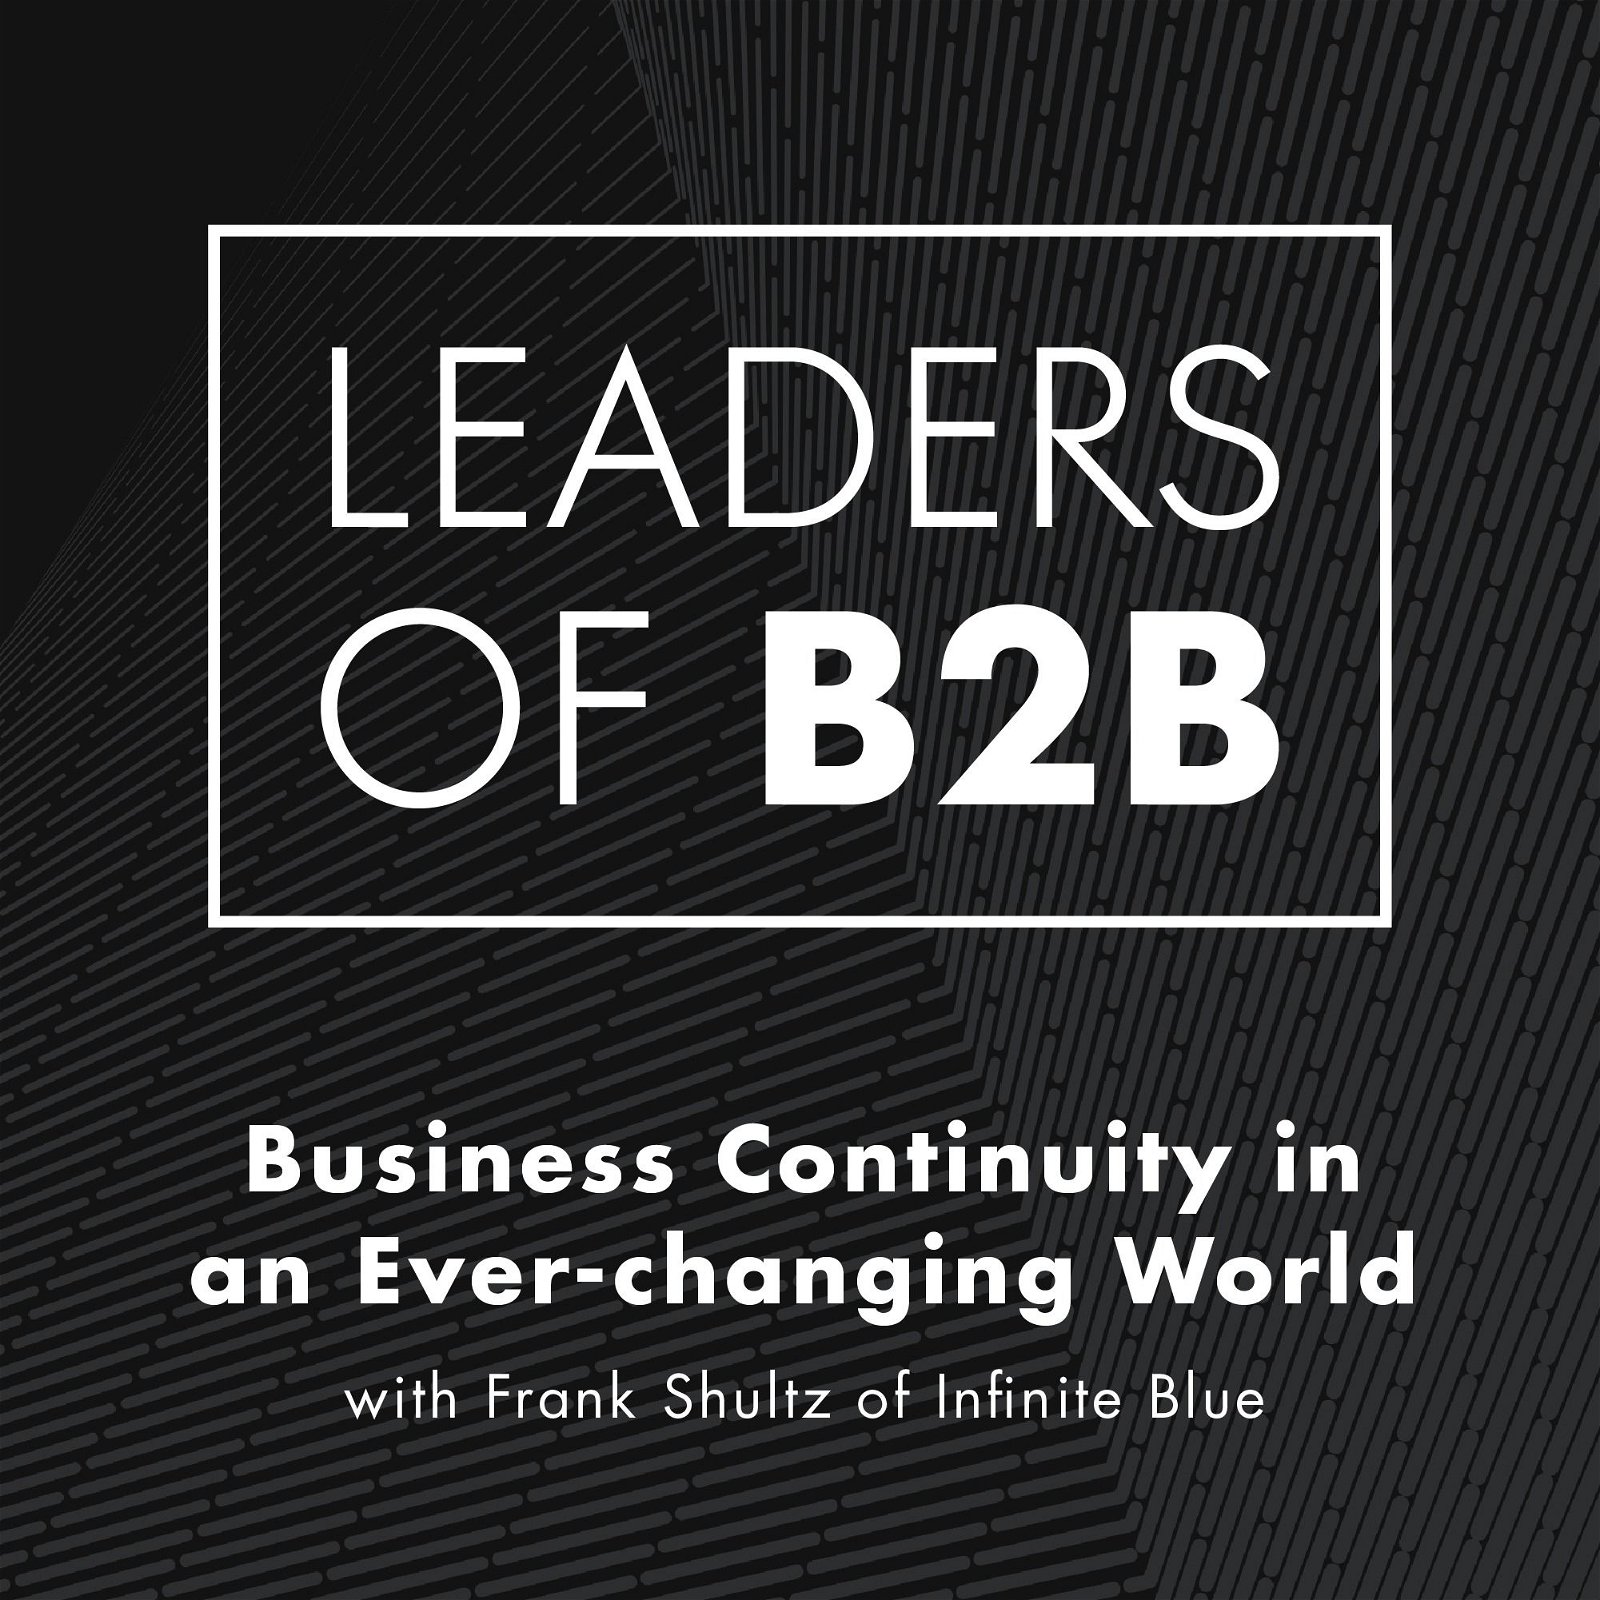 Business Continuity in an Ever-changing World with Frank Shultz of Infinite Blue